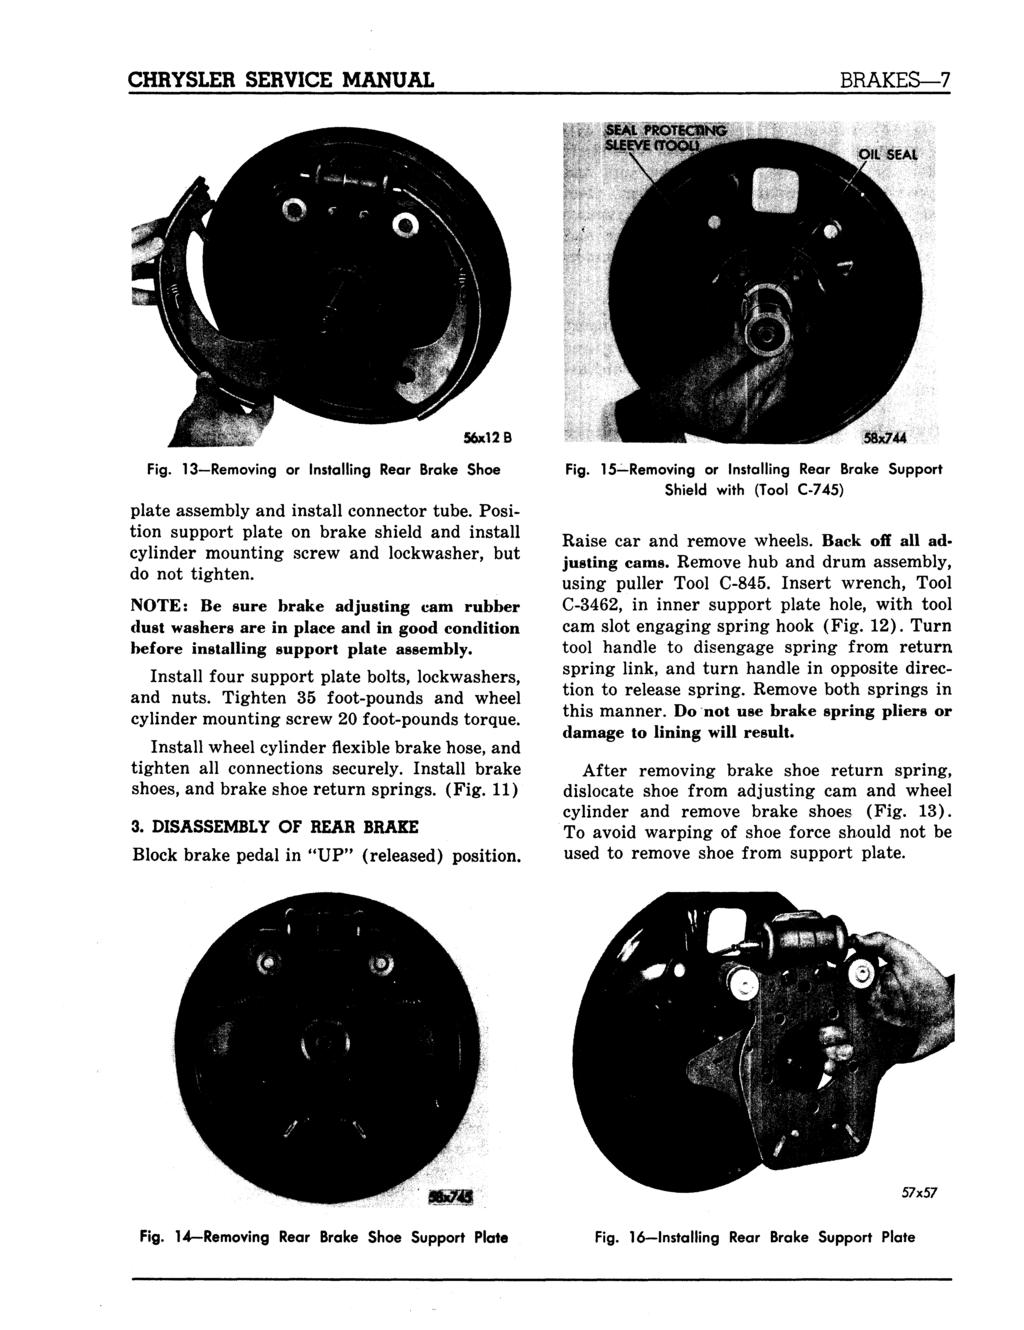 CHRYSLER SERVICE MANUAL BRAKES 7 iiii 56x12 B Fig. 13 Removing or Installing Rear Brake Shoe plate assembly and install connector tube.